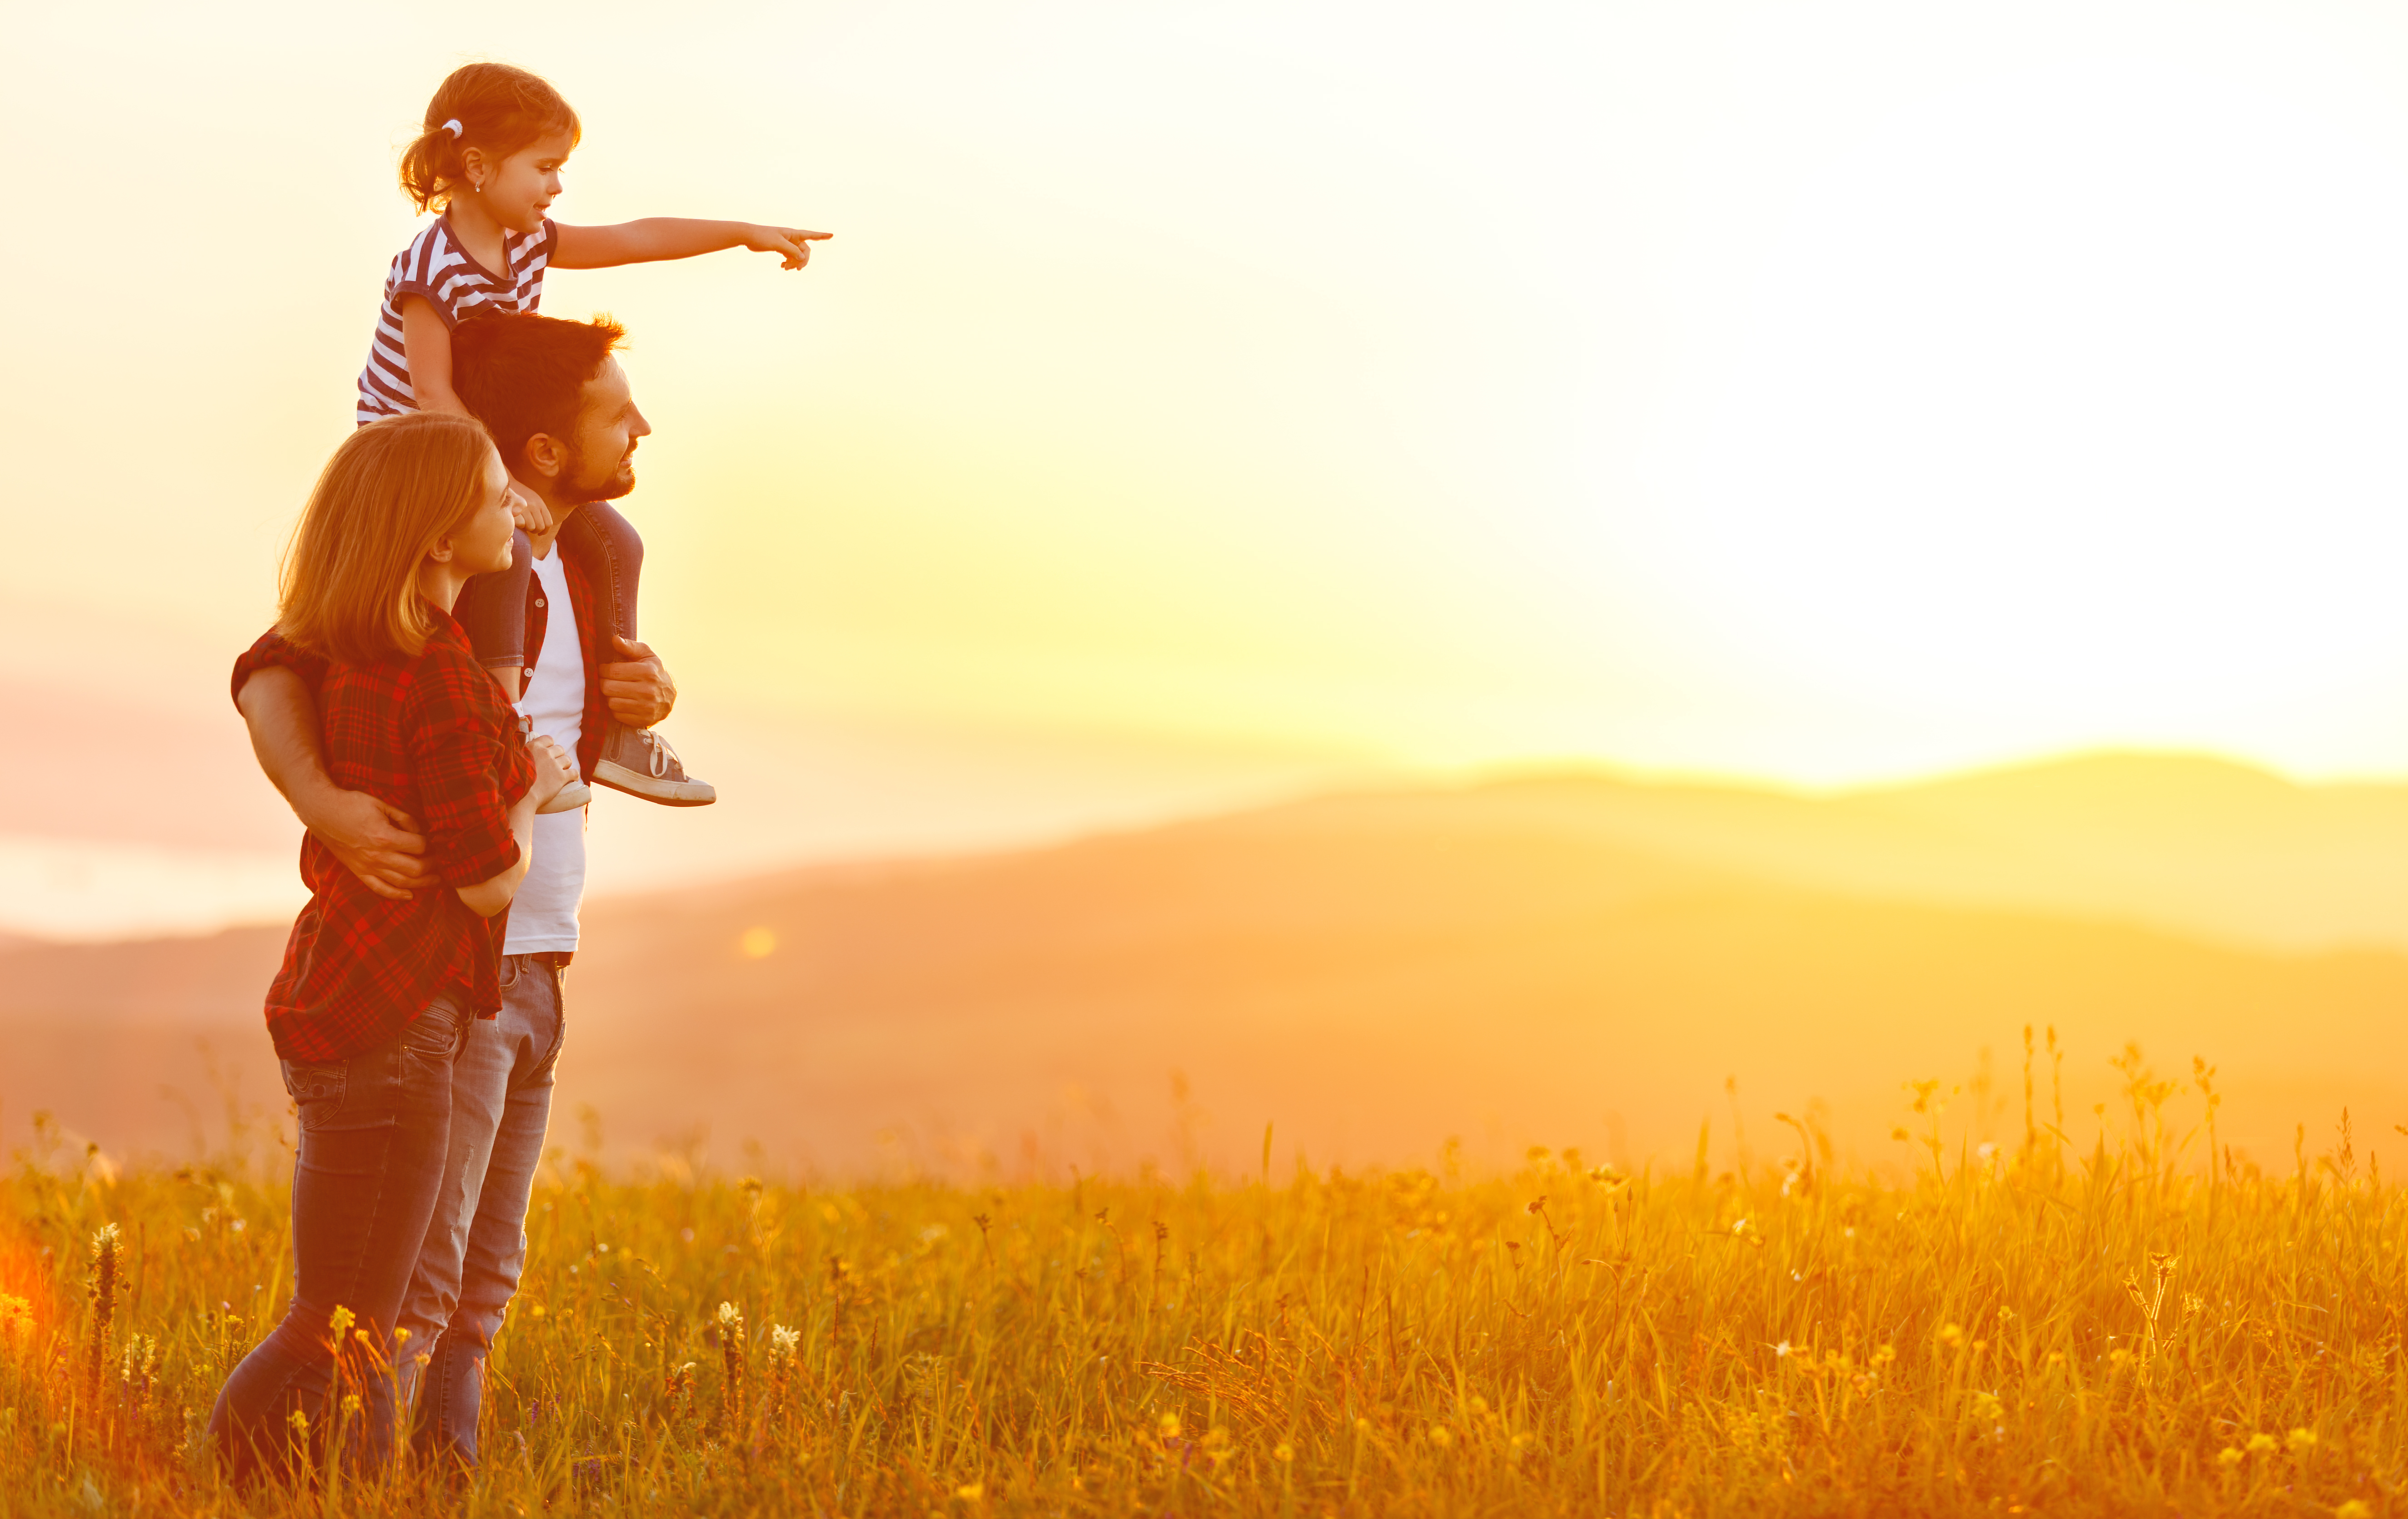 Couple watching the sunset with their little daughter | Source: Shutterstock